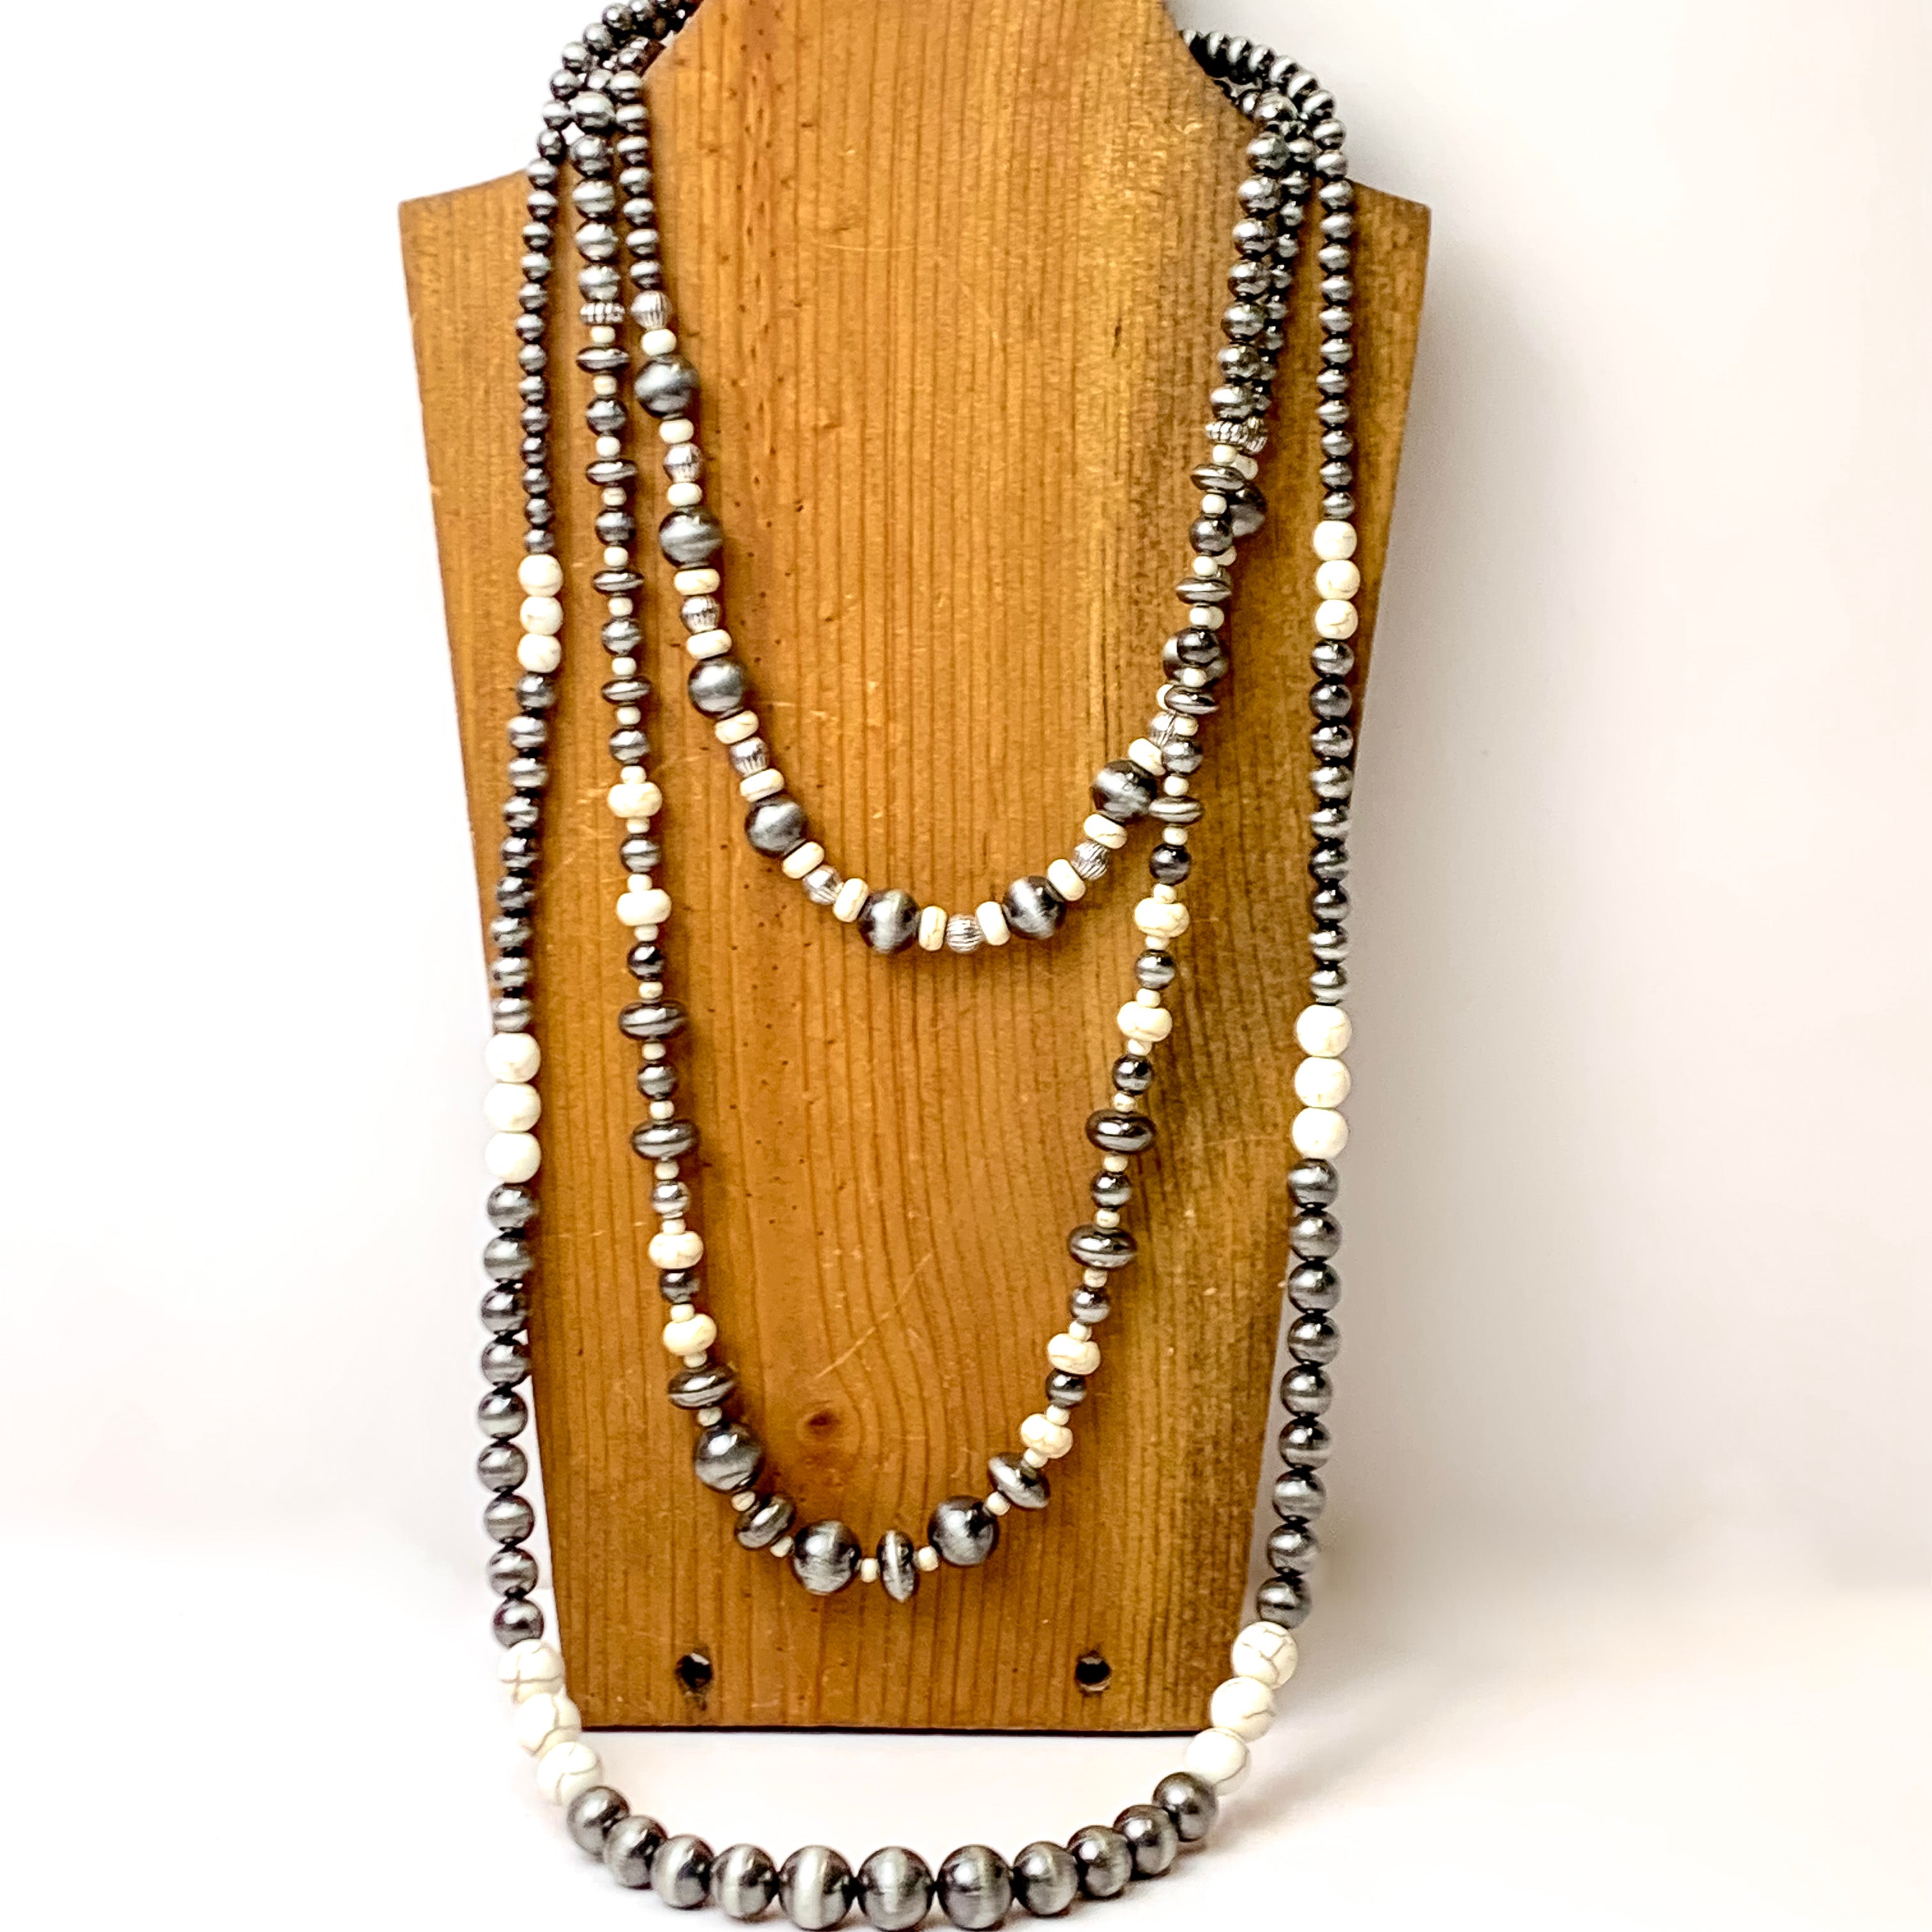 3 Strand Graduated Faux Navajo Pearl Necklace in Ivory - Giddy Up Glamour Boutique